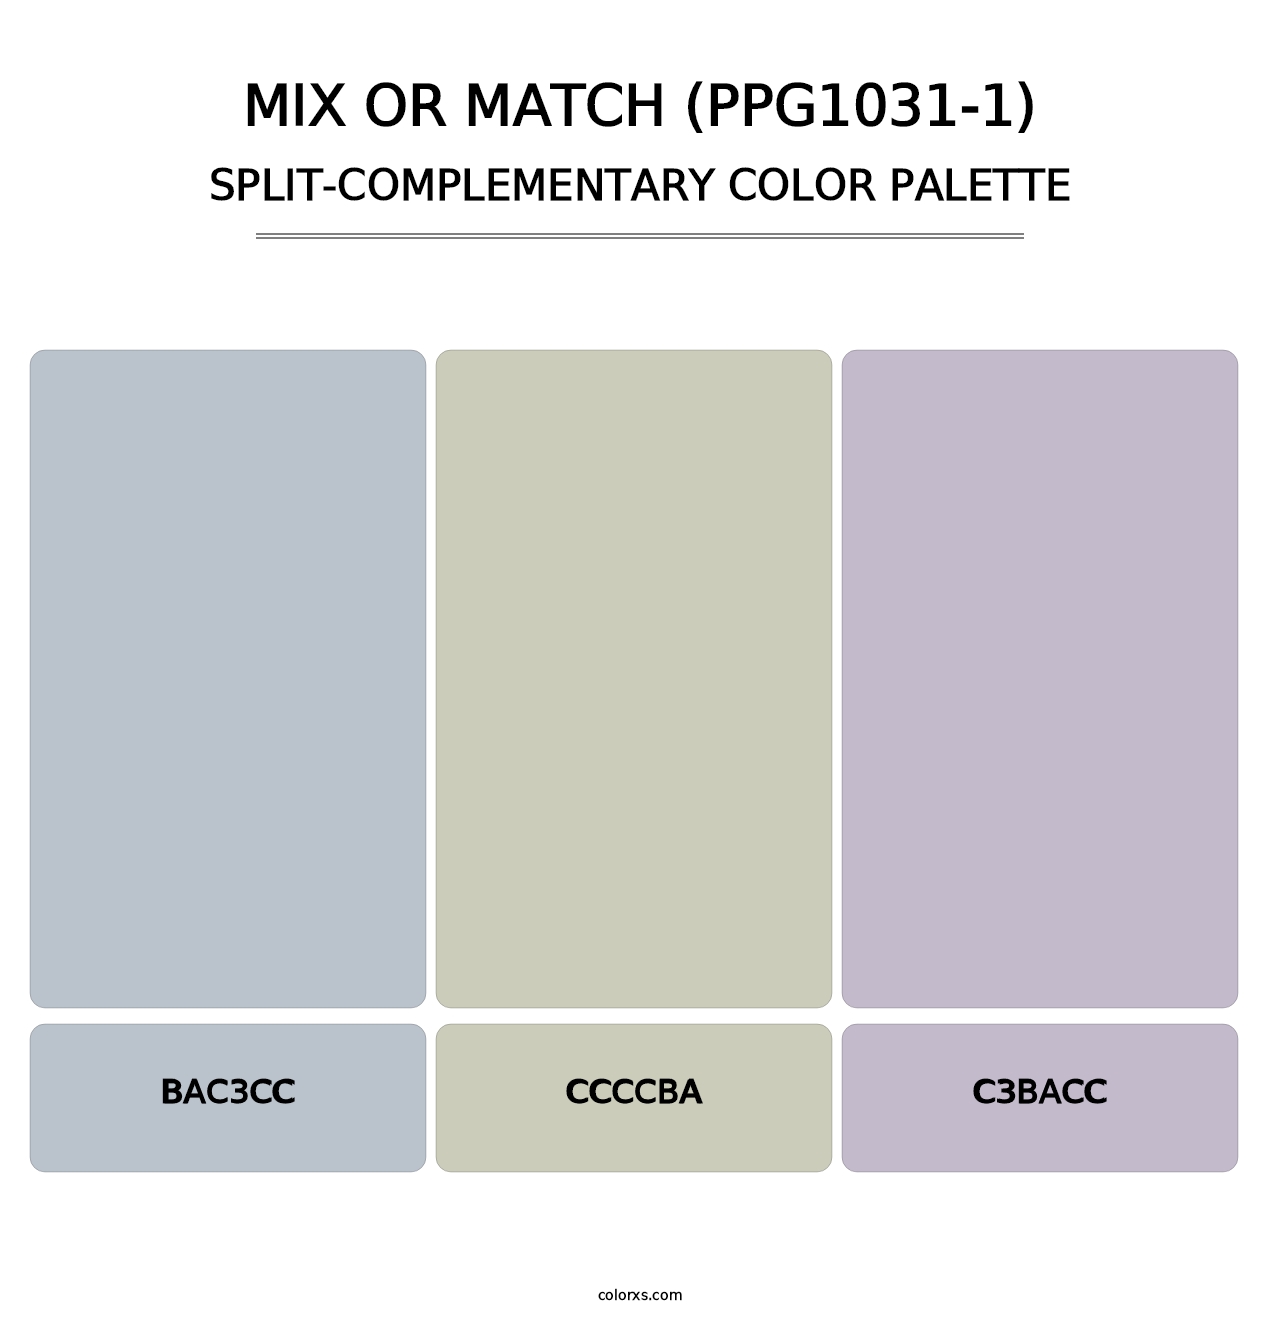 Mix Or Match (PPG1031-1) - Split-Complementary Color Palette